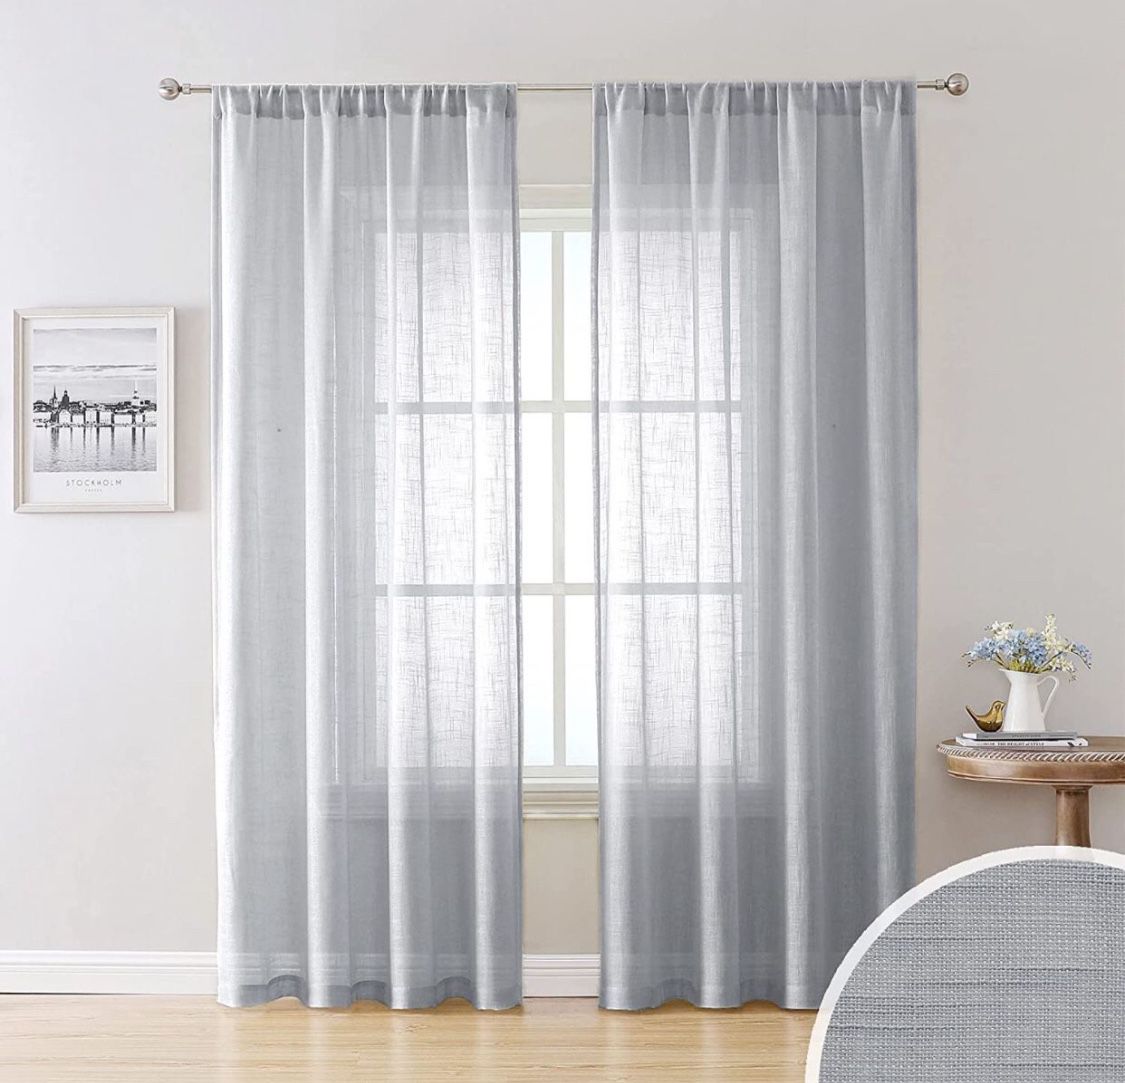 New! Semi-Sheer Rod Pocket Curtain Panels (Set of 2) for Kitchen Bedroom Living Room Drapes Sunlight Filtering Privacy Semi Home Decor, Grey 52" W x 9